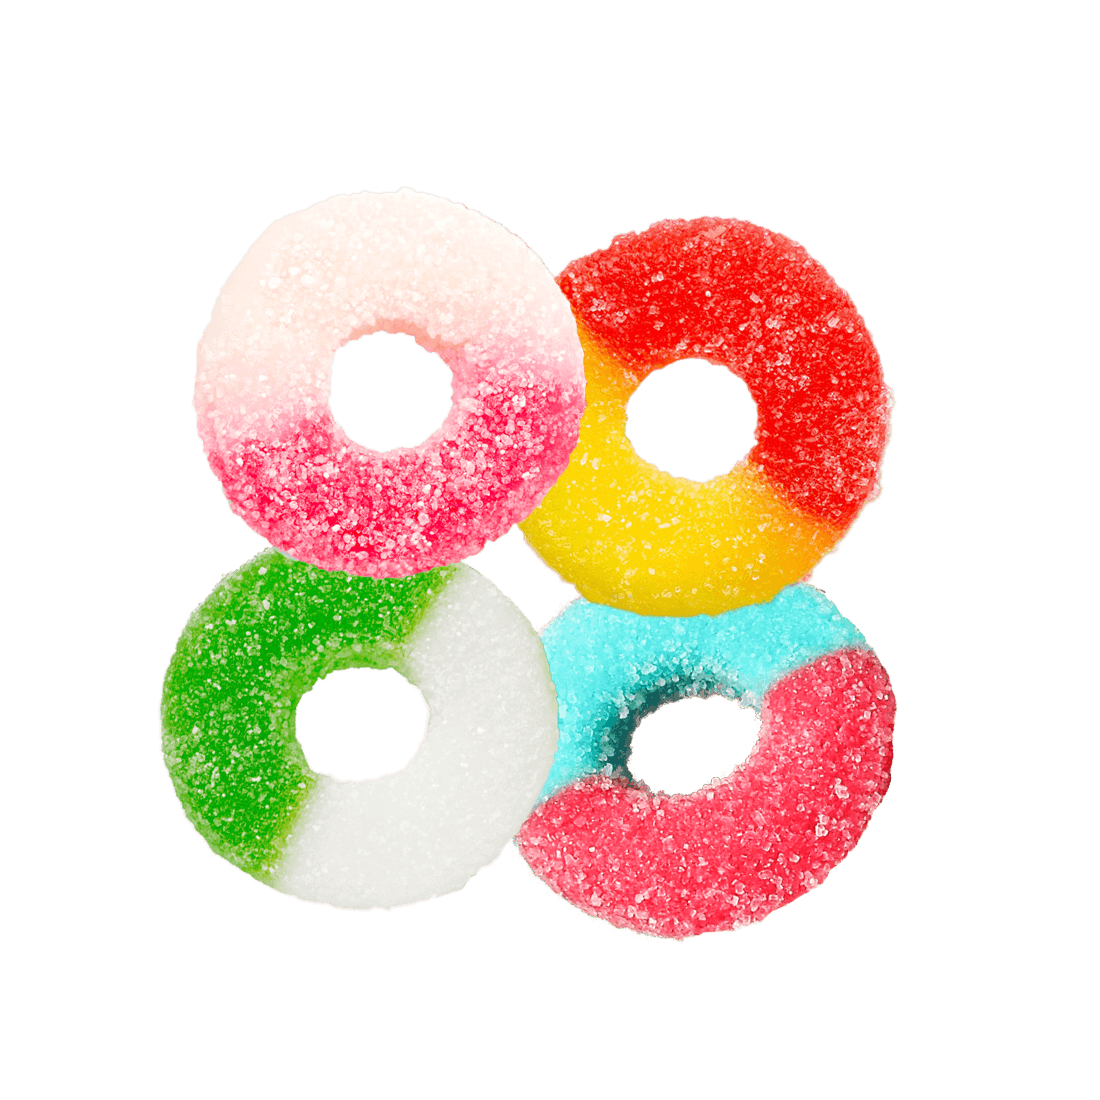 wholesale space gummy rings come in 4 flavors, watermelon, peach, apple, and neon